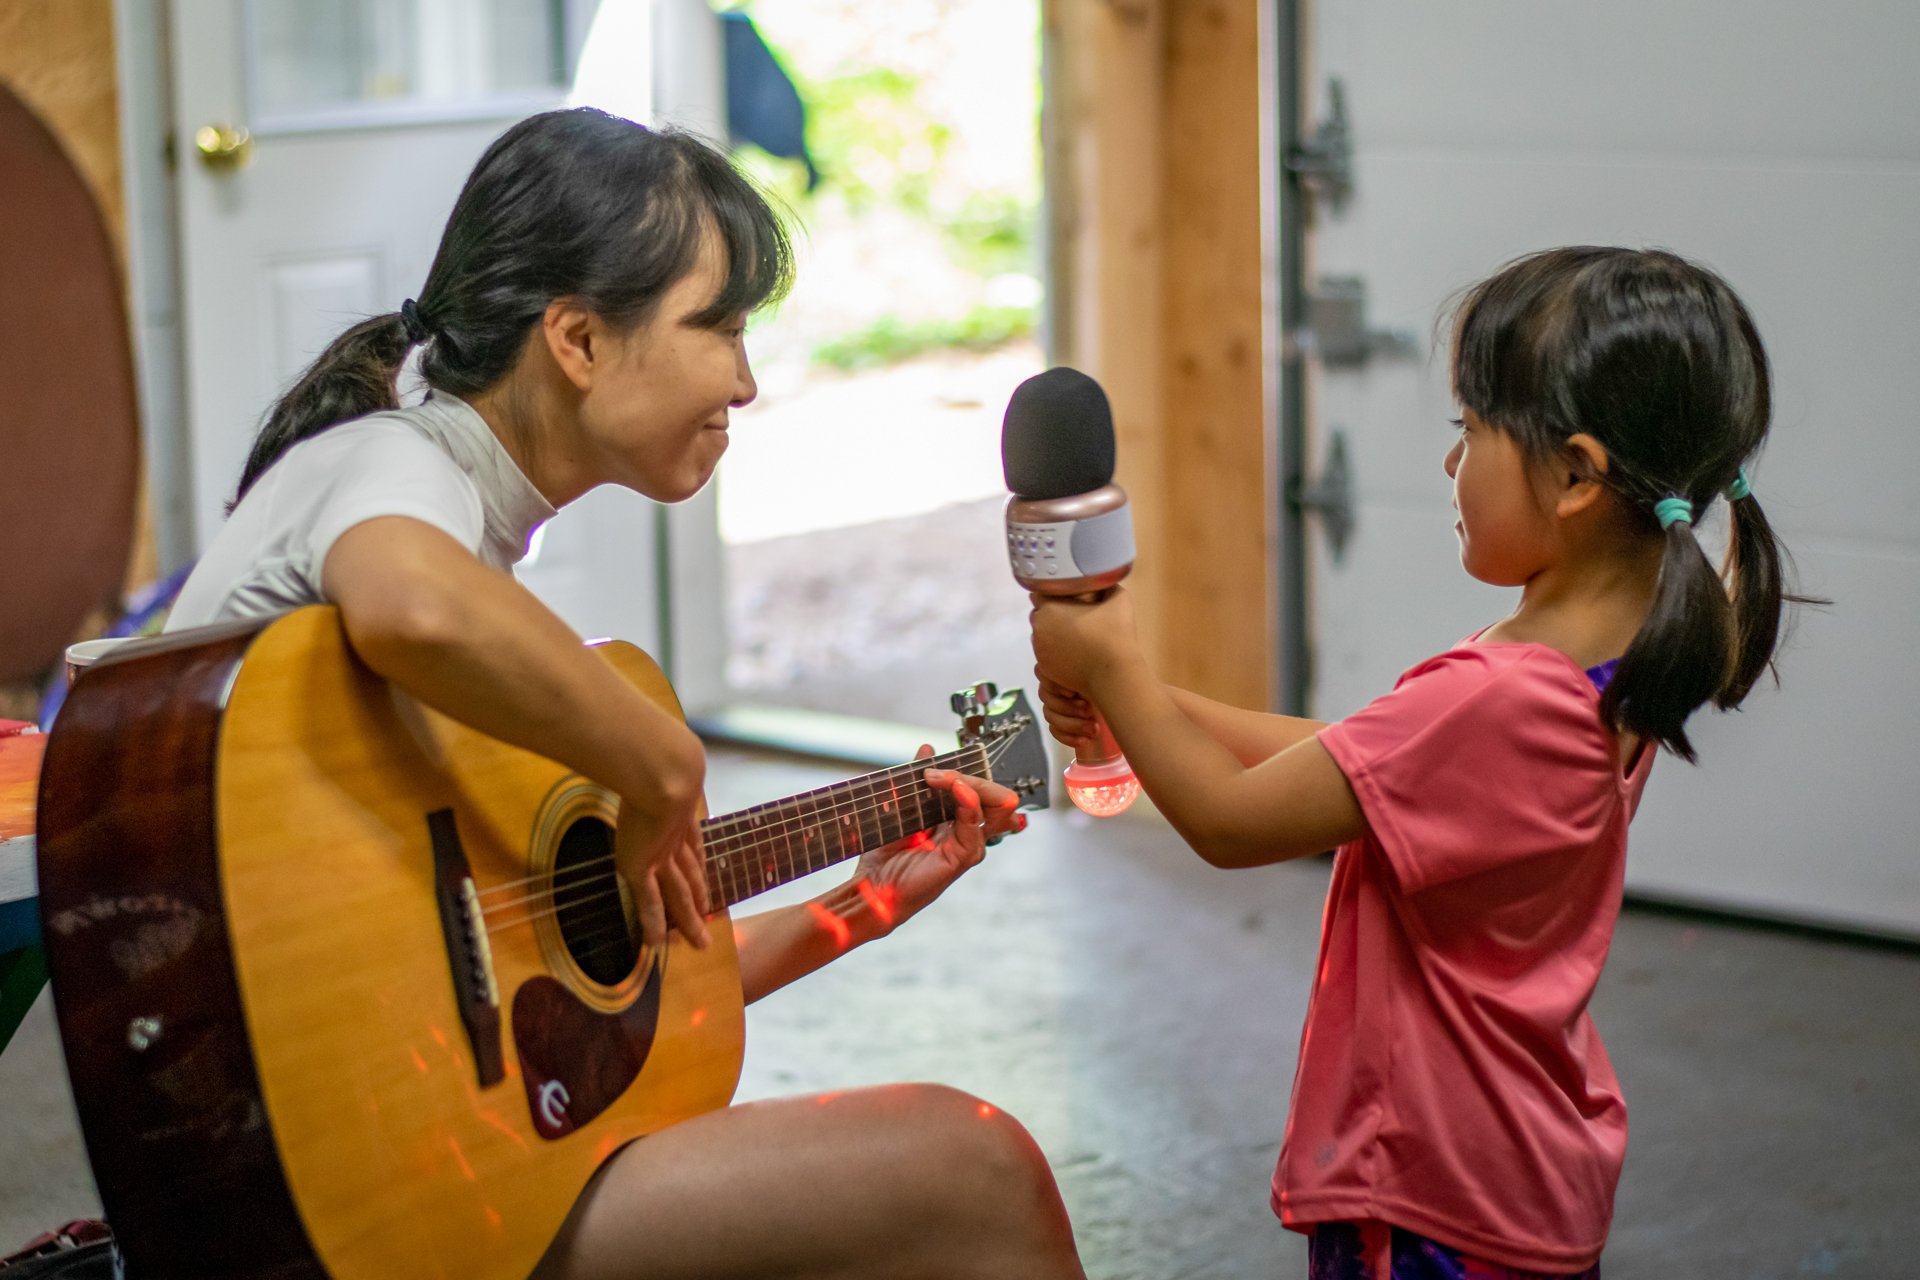 A mom plays an acoustic guitar while her daughter holds up fake microphone for her to sing into